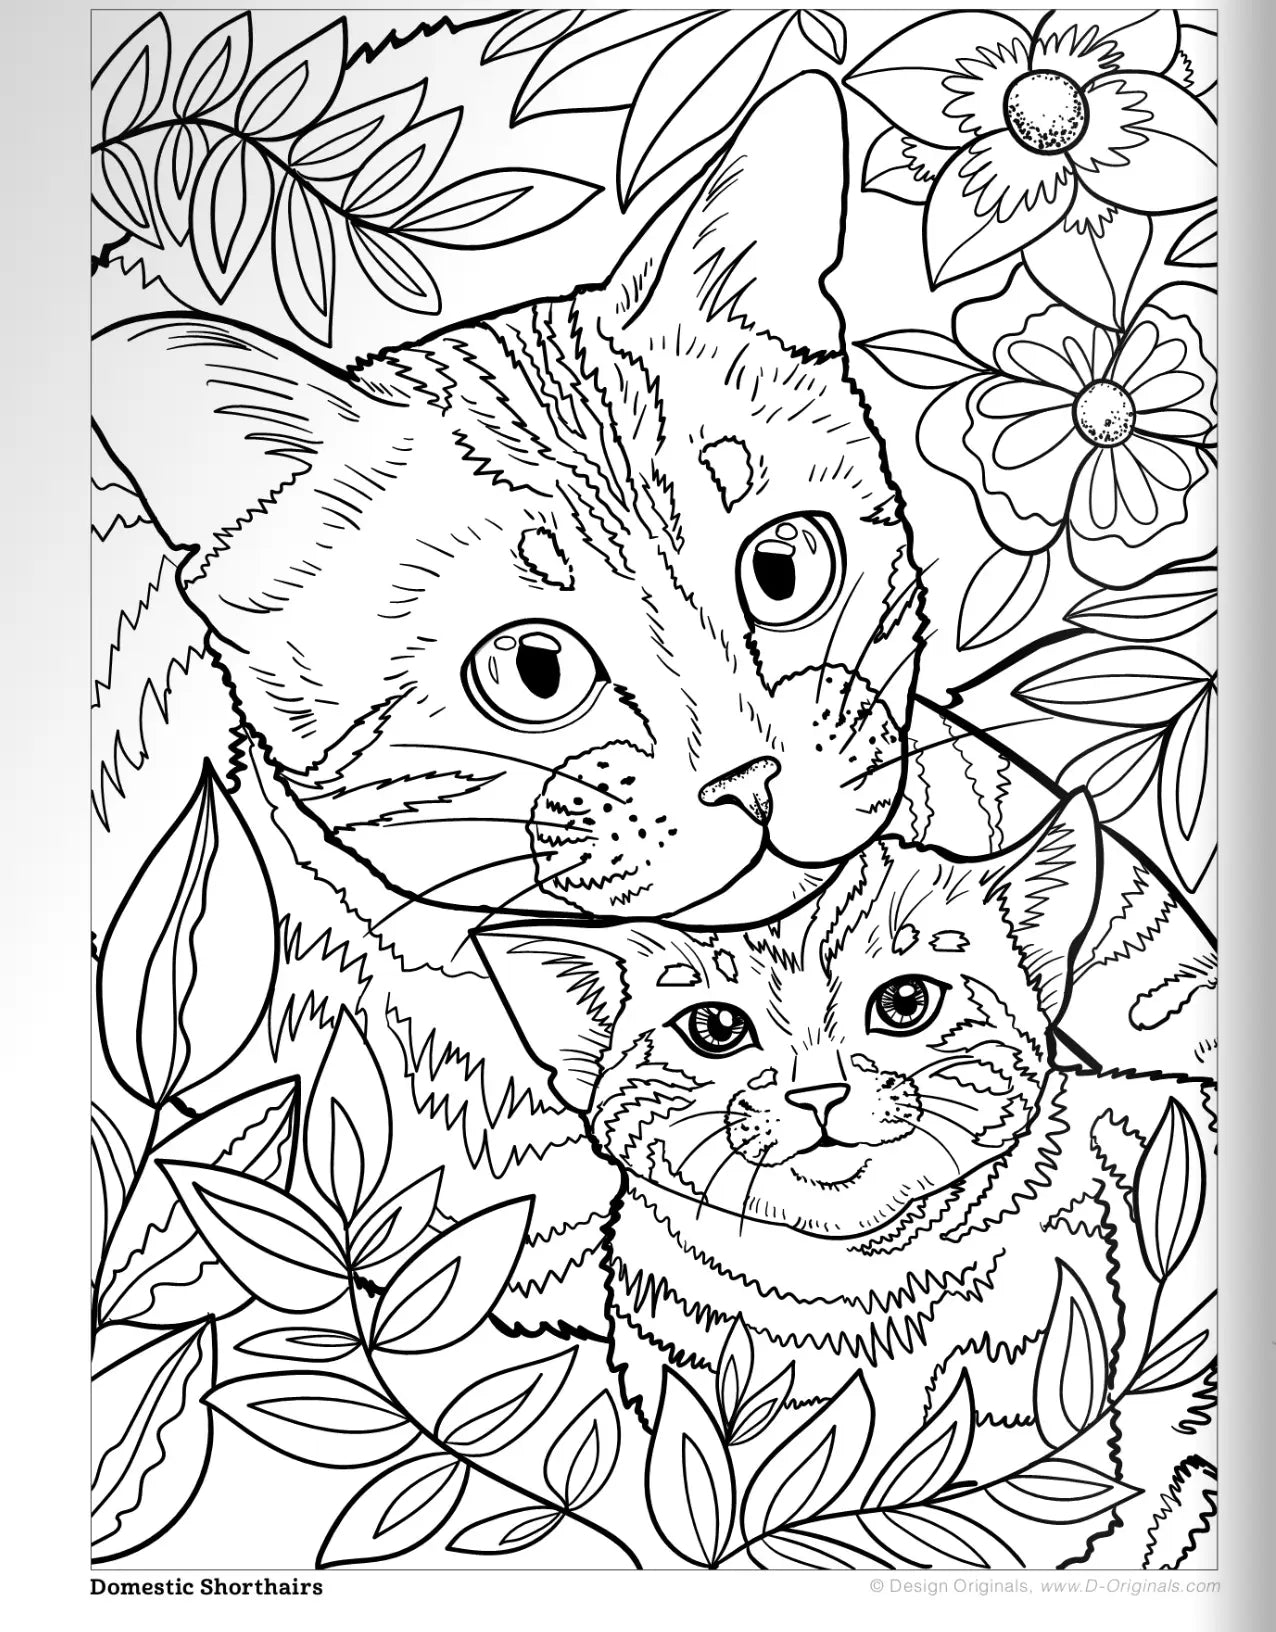 Coloring Book Cats & Kittens